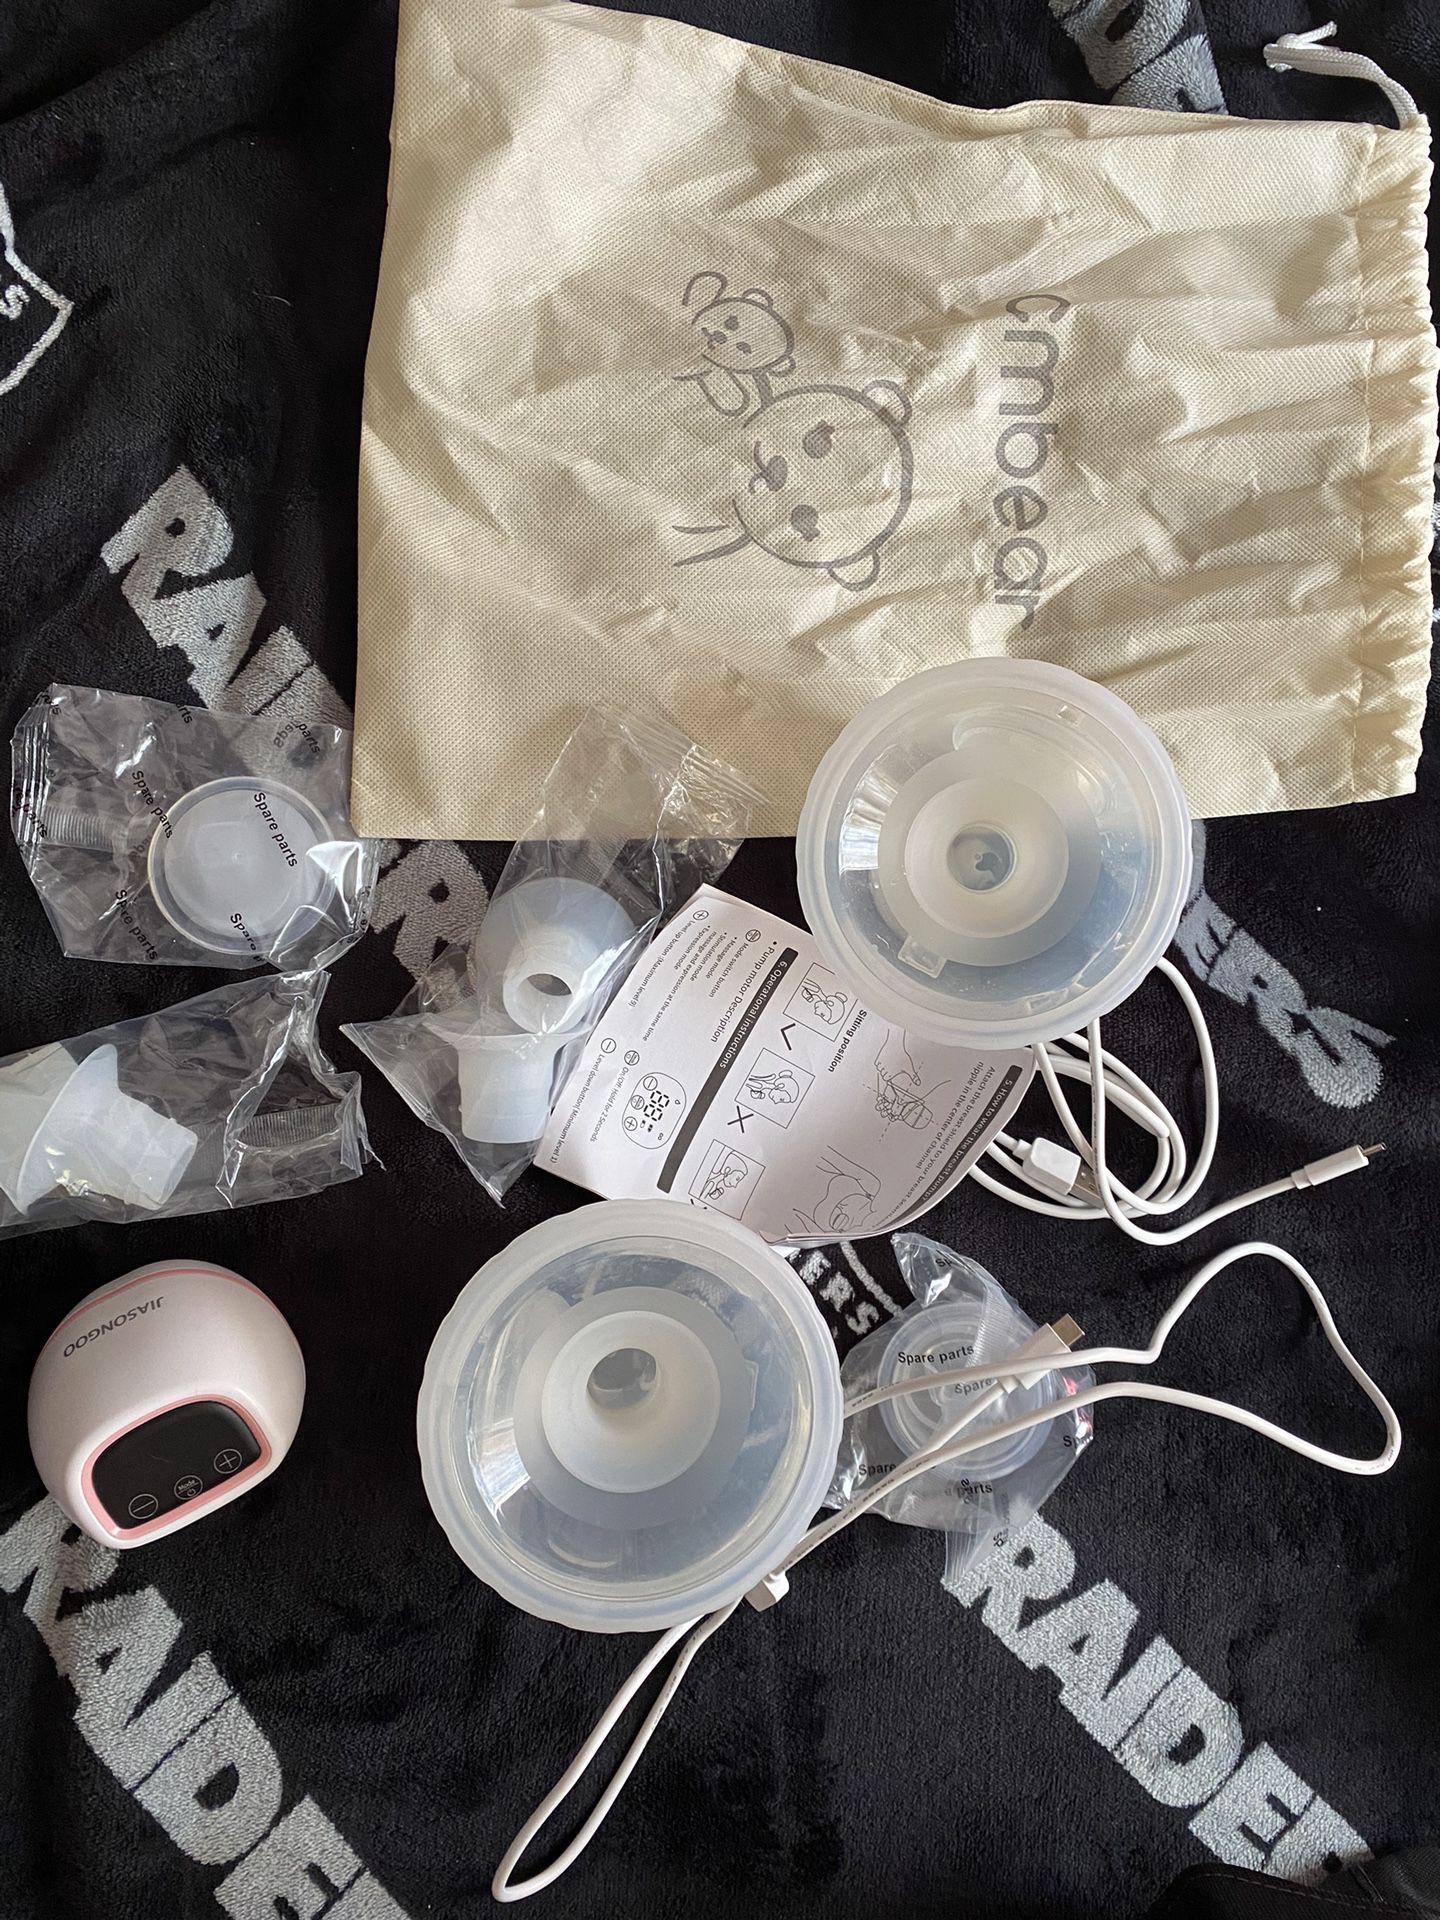 Portable breast pump for Sale in Las Vegas, NV - OfferUp